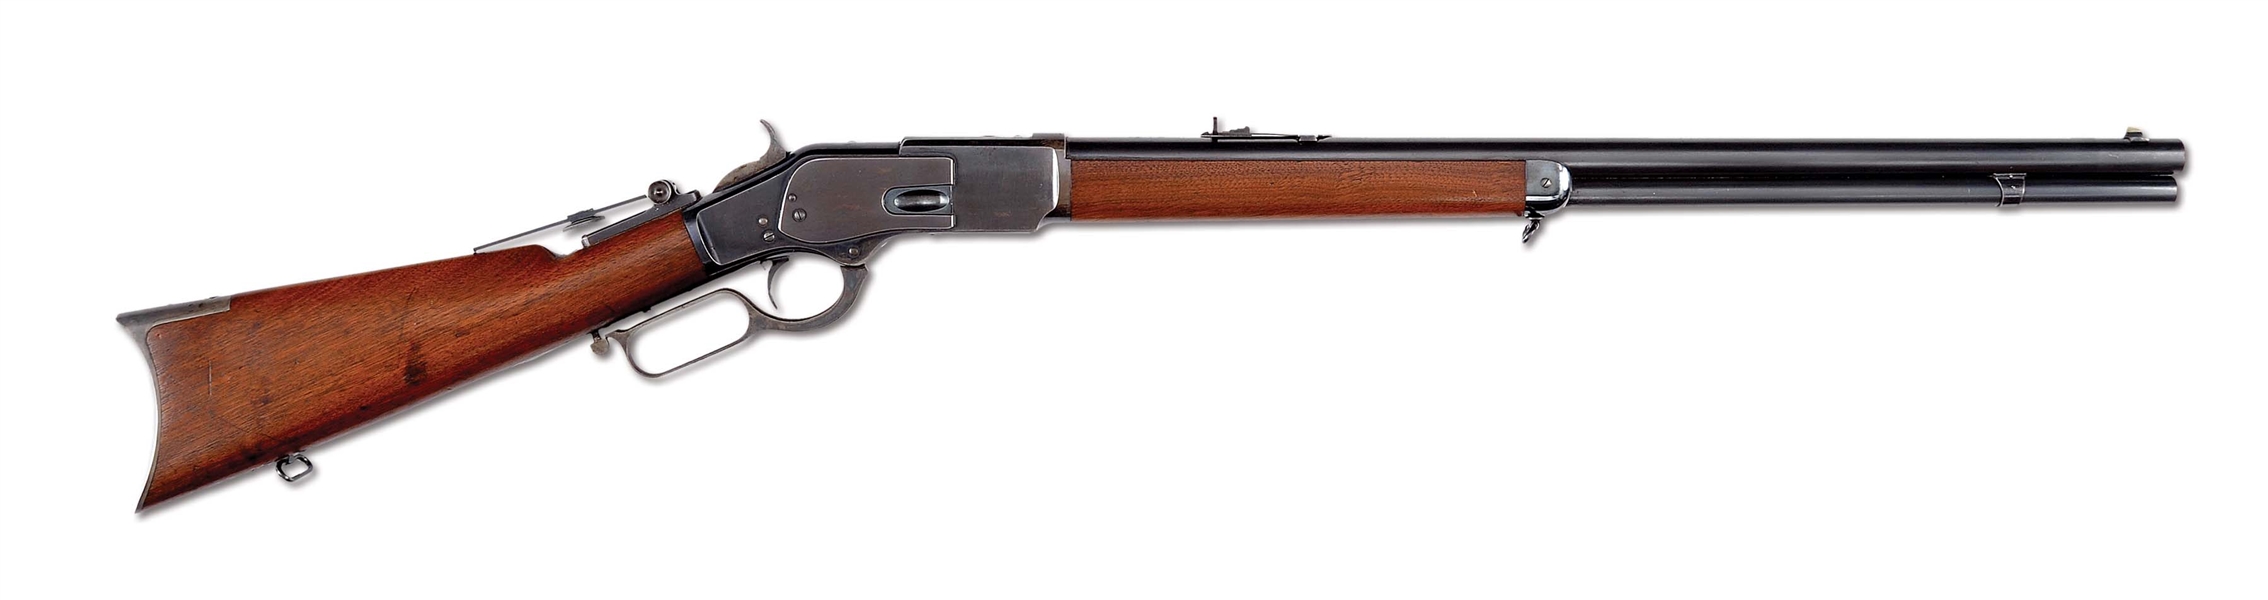 (A) FANTASTIC WINCHESTER FIRST MODEL 1873 RIFLE WITH BLUED RECEIVER AND SET TRIGGER (1876).